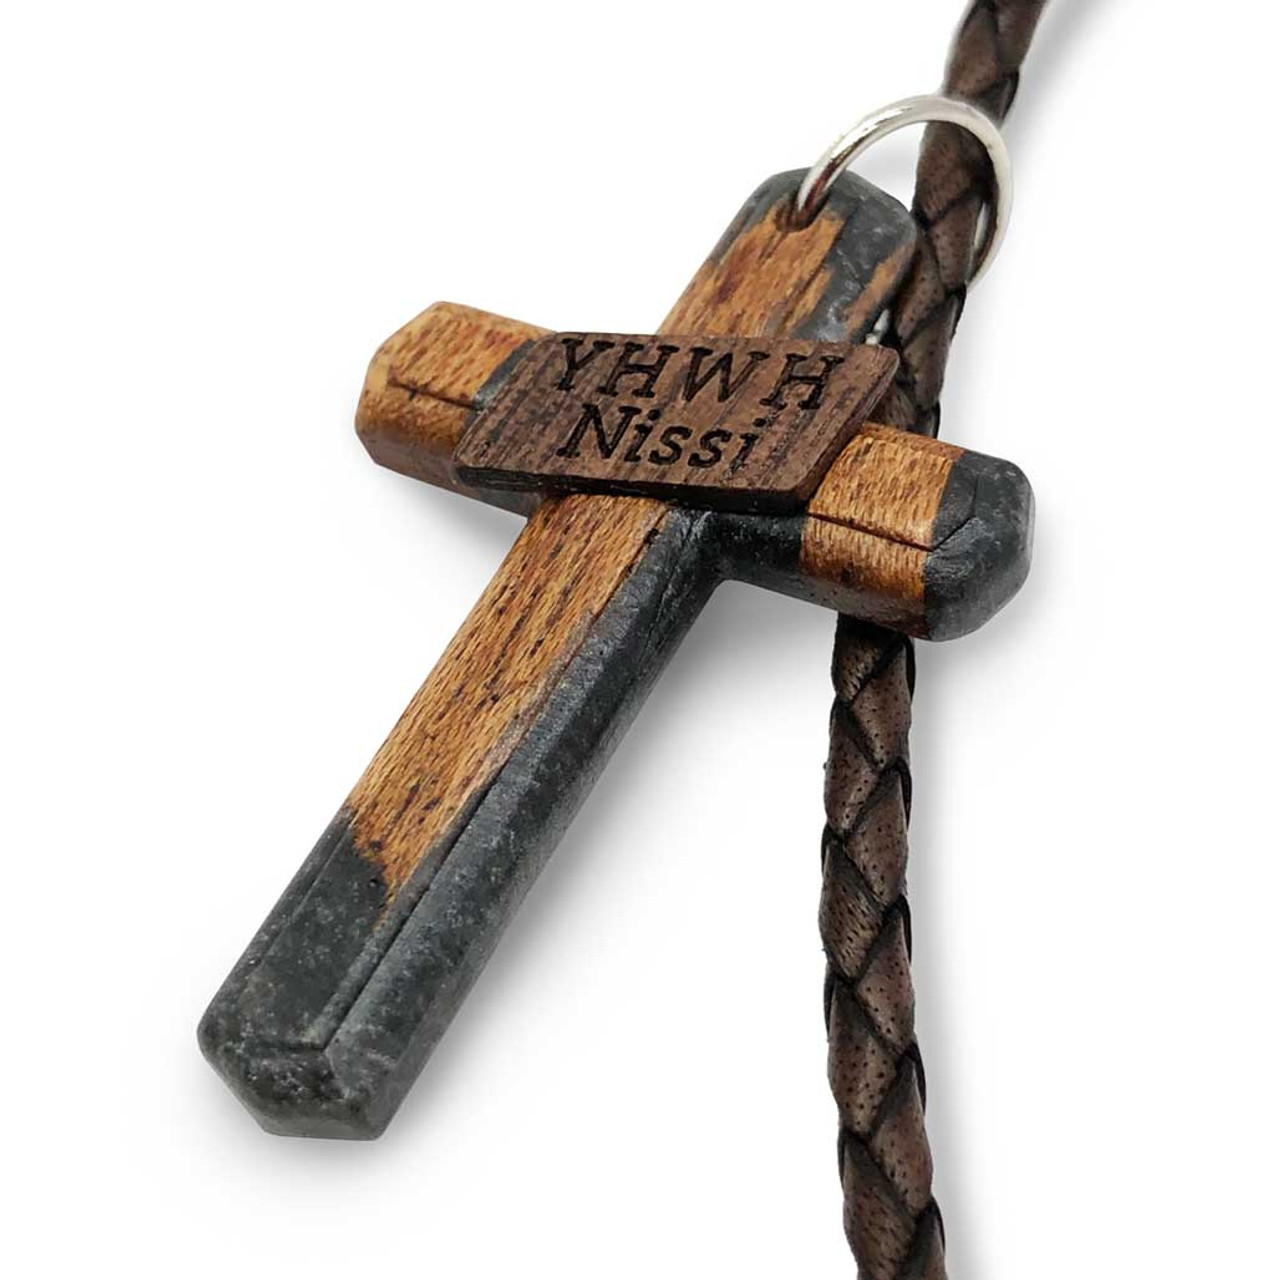 Name of God / YHWH Nissi / Unisex / Mahogany Wood with Steel Gray Resin / Cross  Pendant Necklace